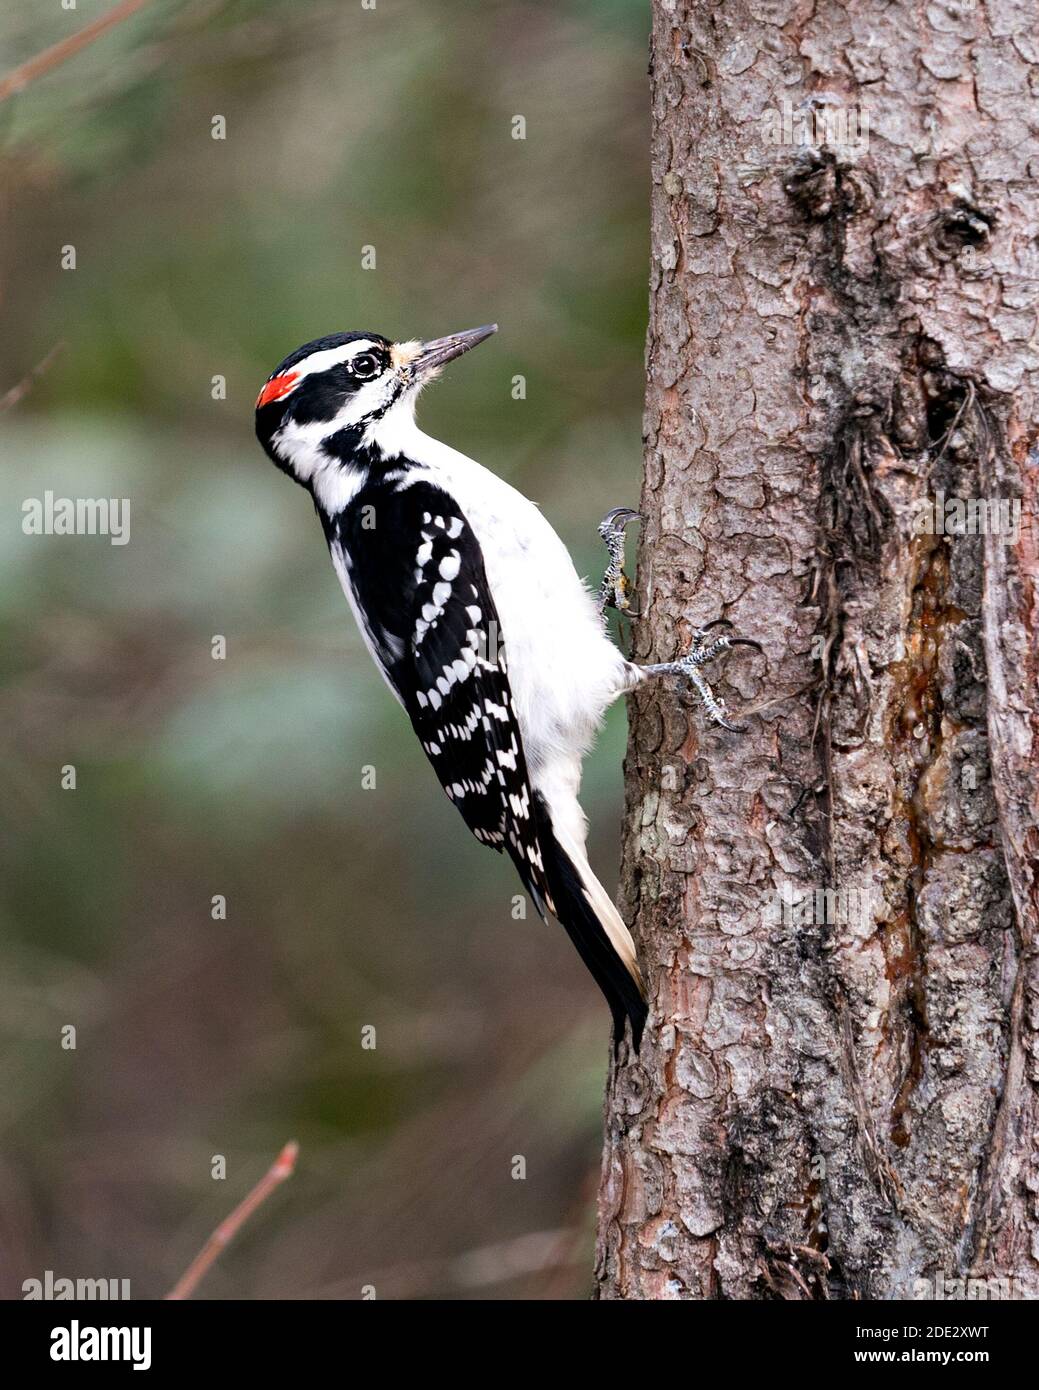 Woodpecker close-up side profile view on a tree trunk with a blur background in its environment and habitat displaying white and black feather plumage Stock Photo